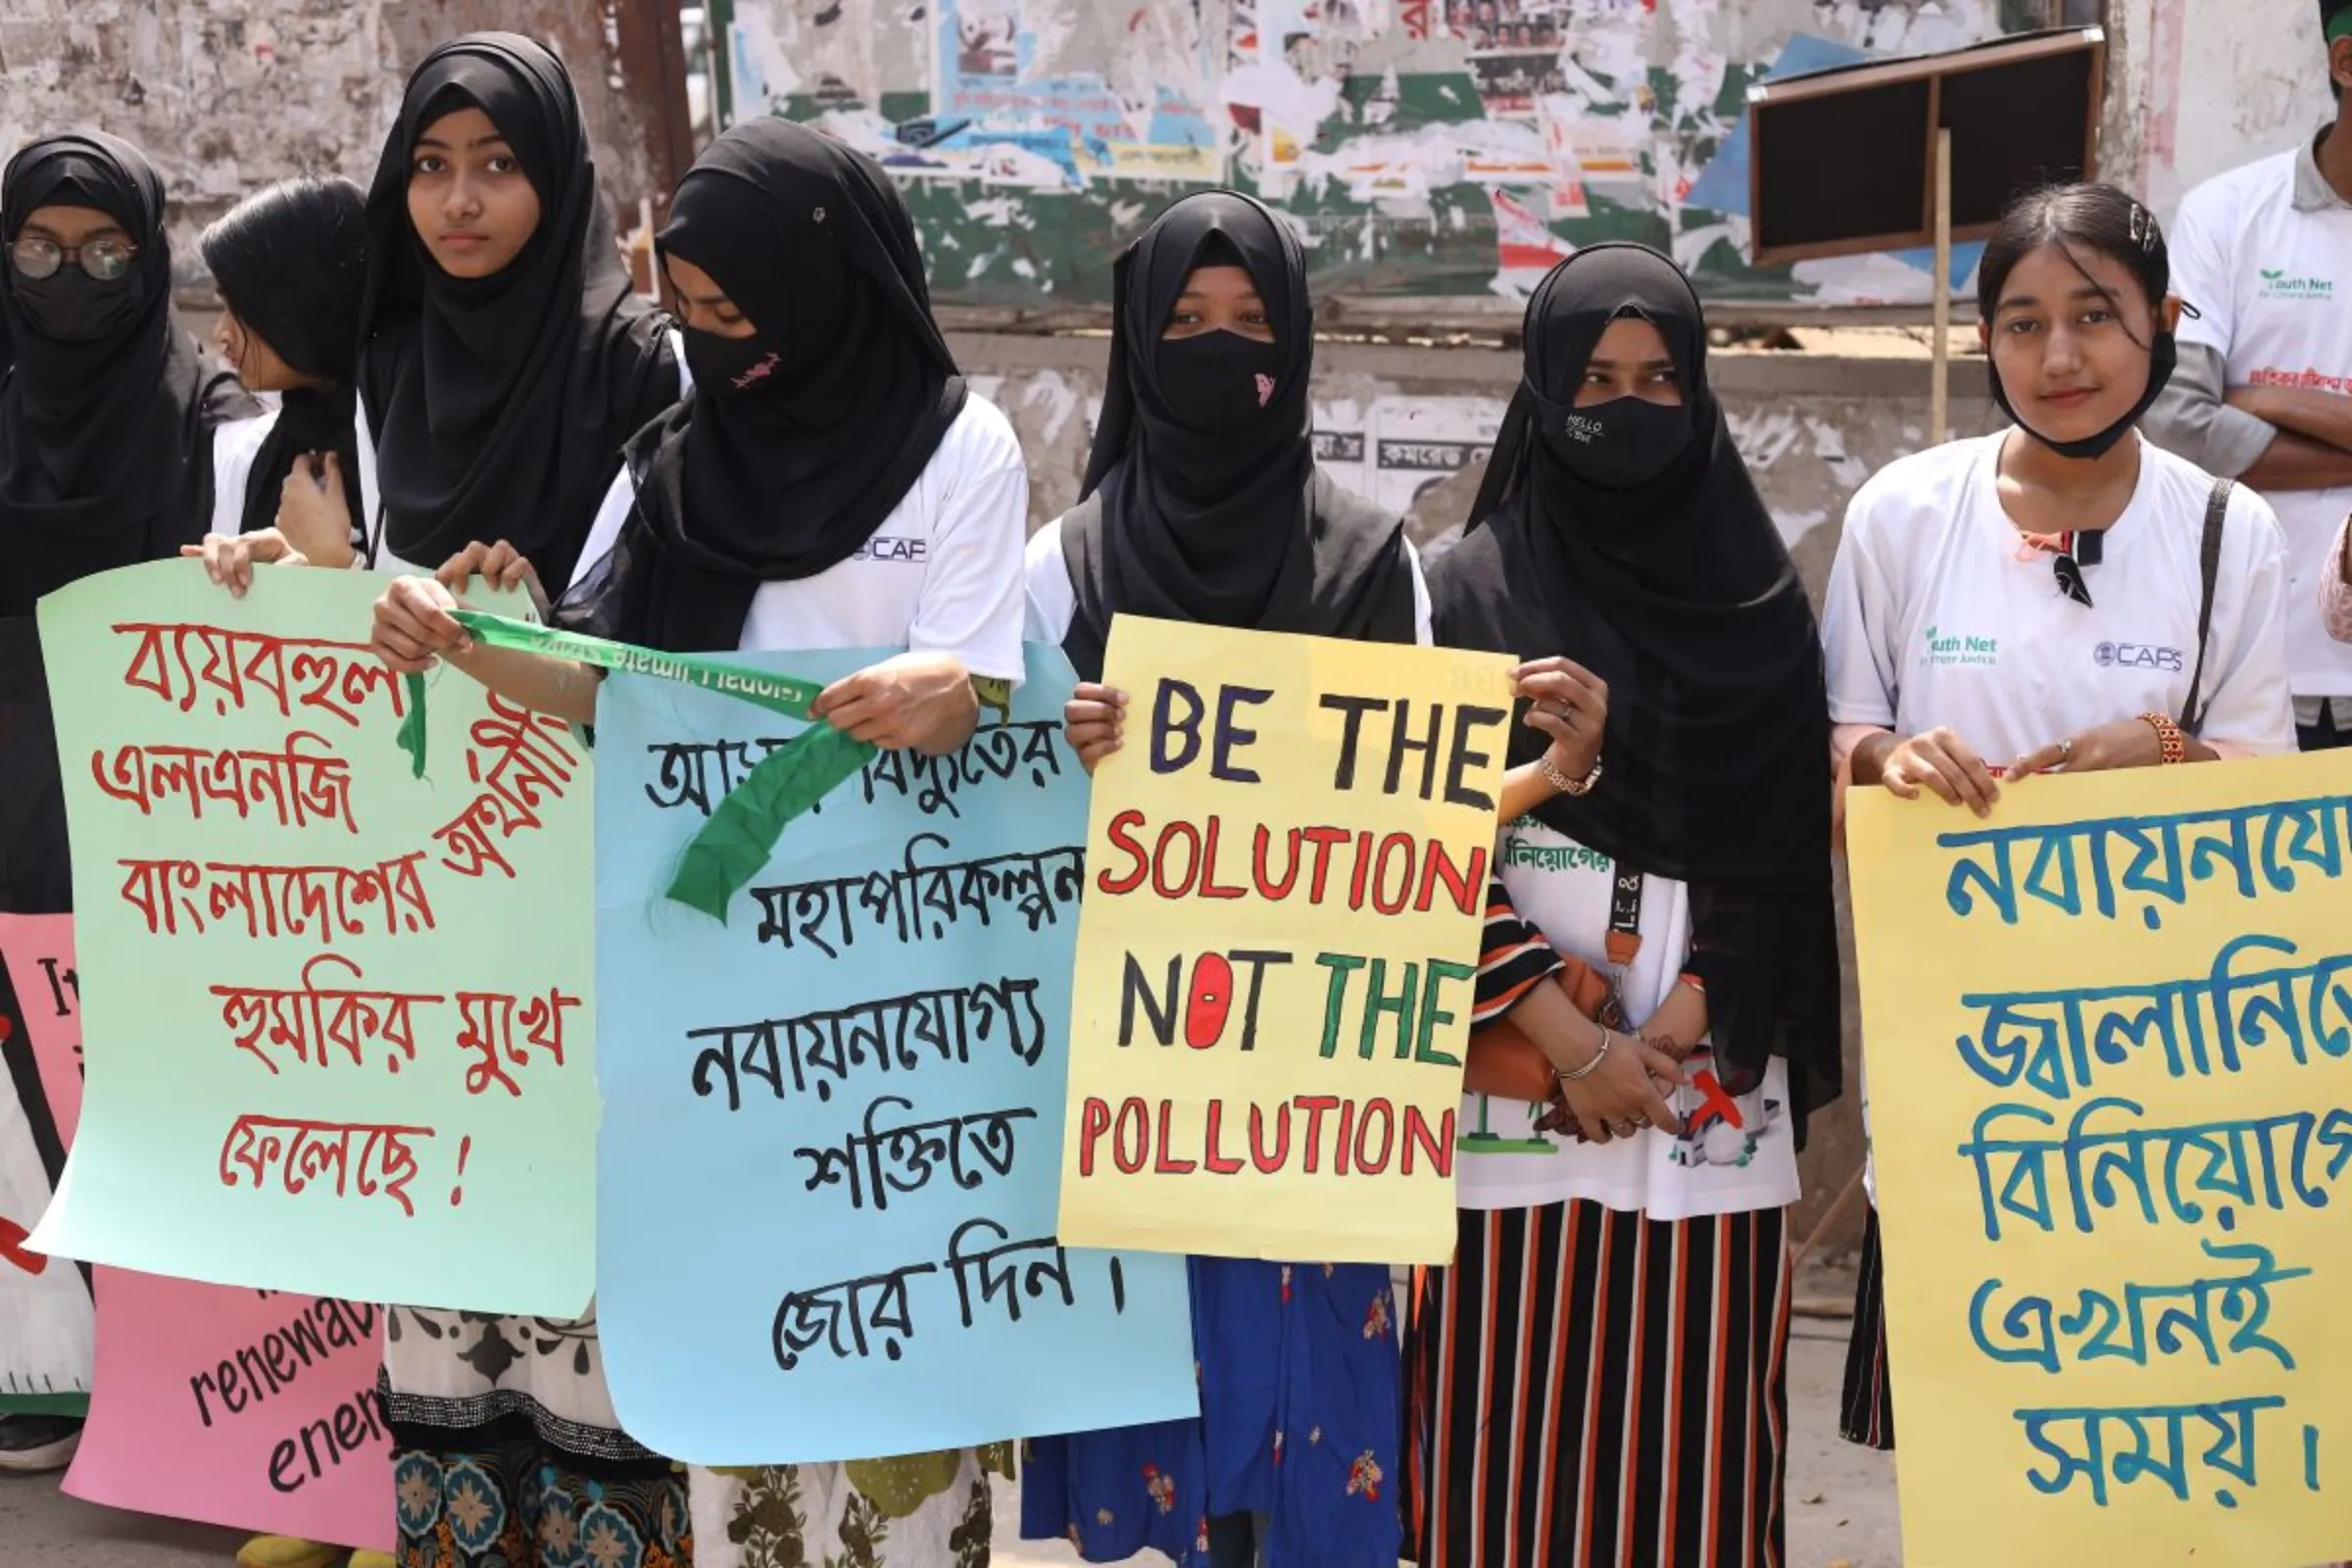 Young activists from the the platform Youthnet for Climate Justice hold a climate strike asking for a stop to fossil fuel development, Dhaka, March 5, 2023